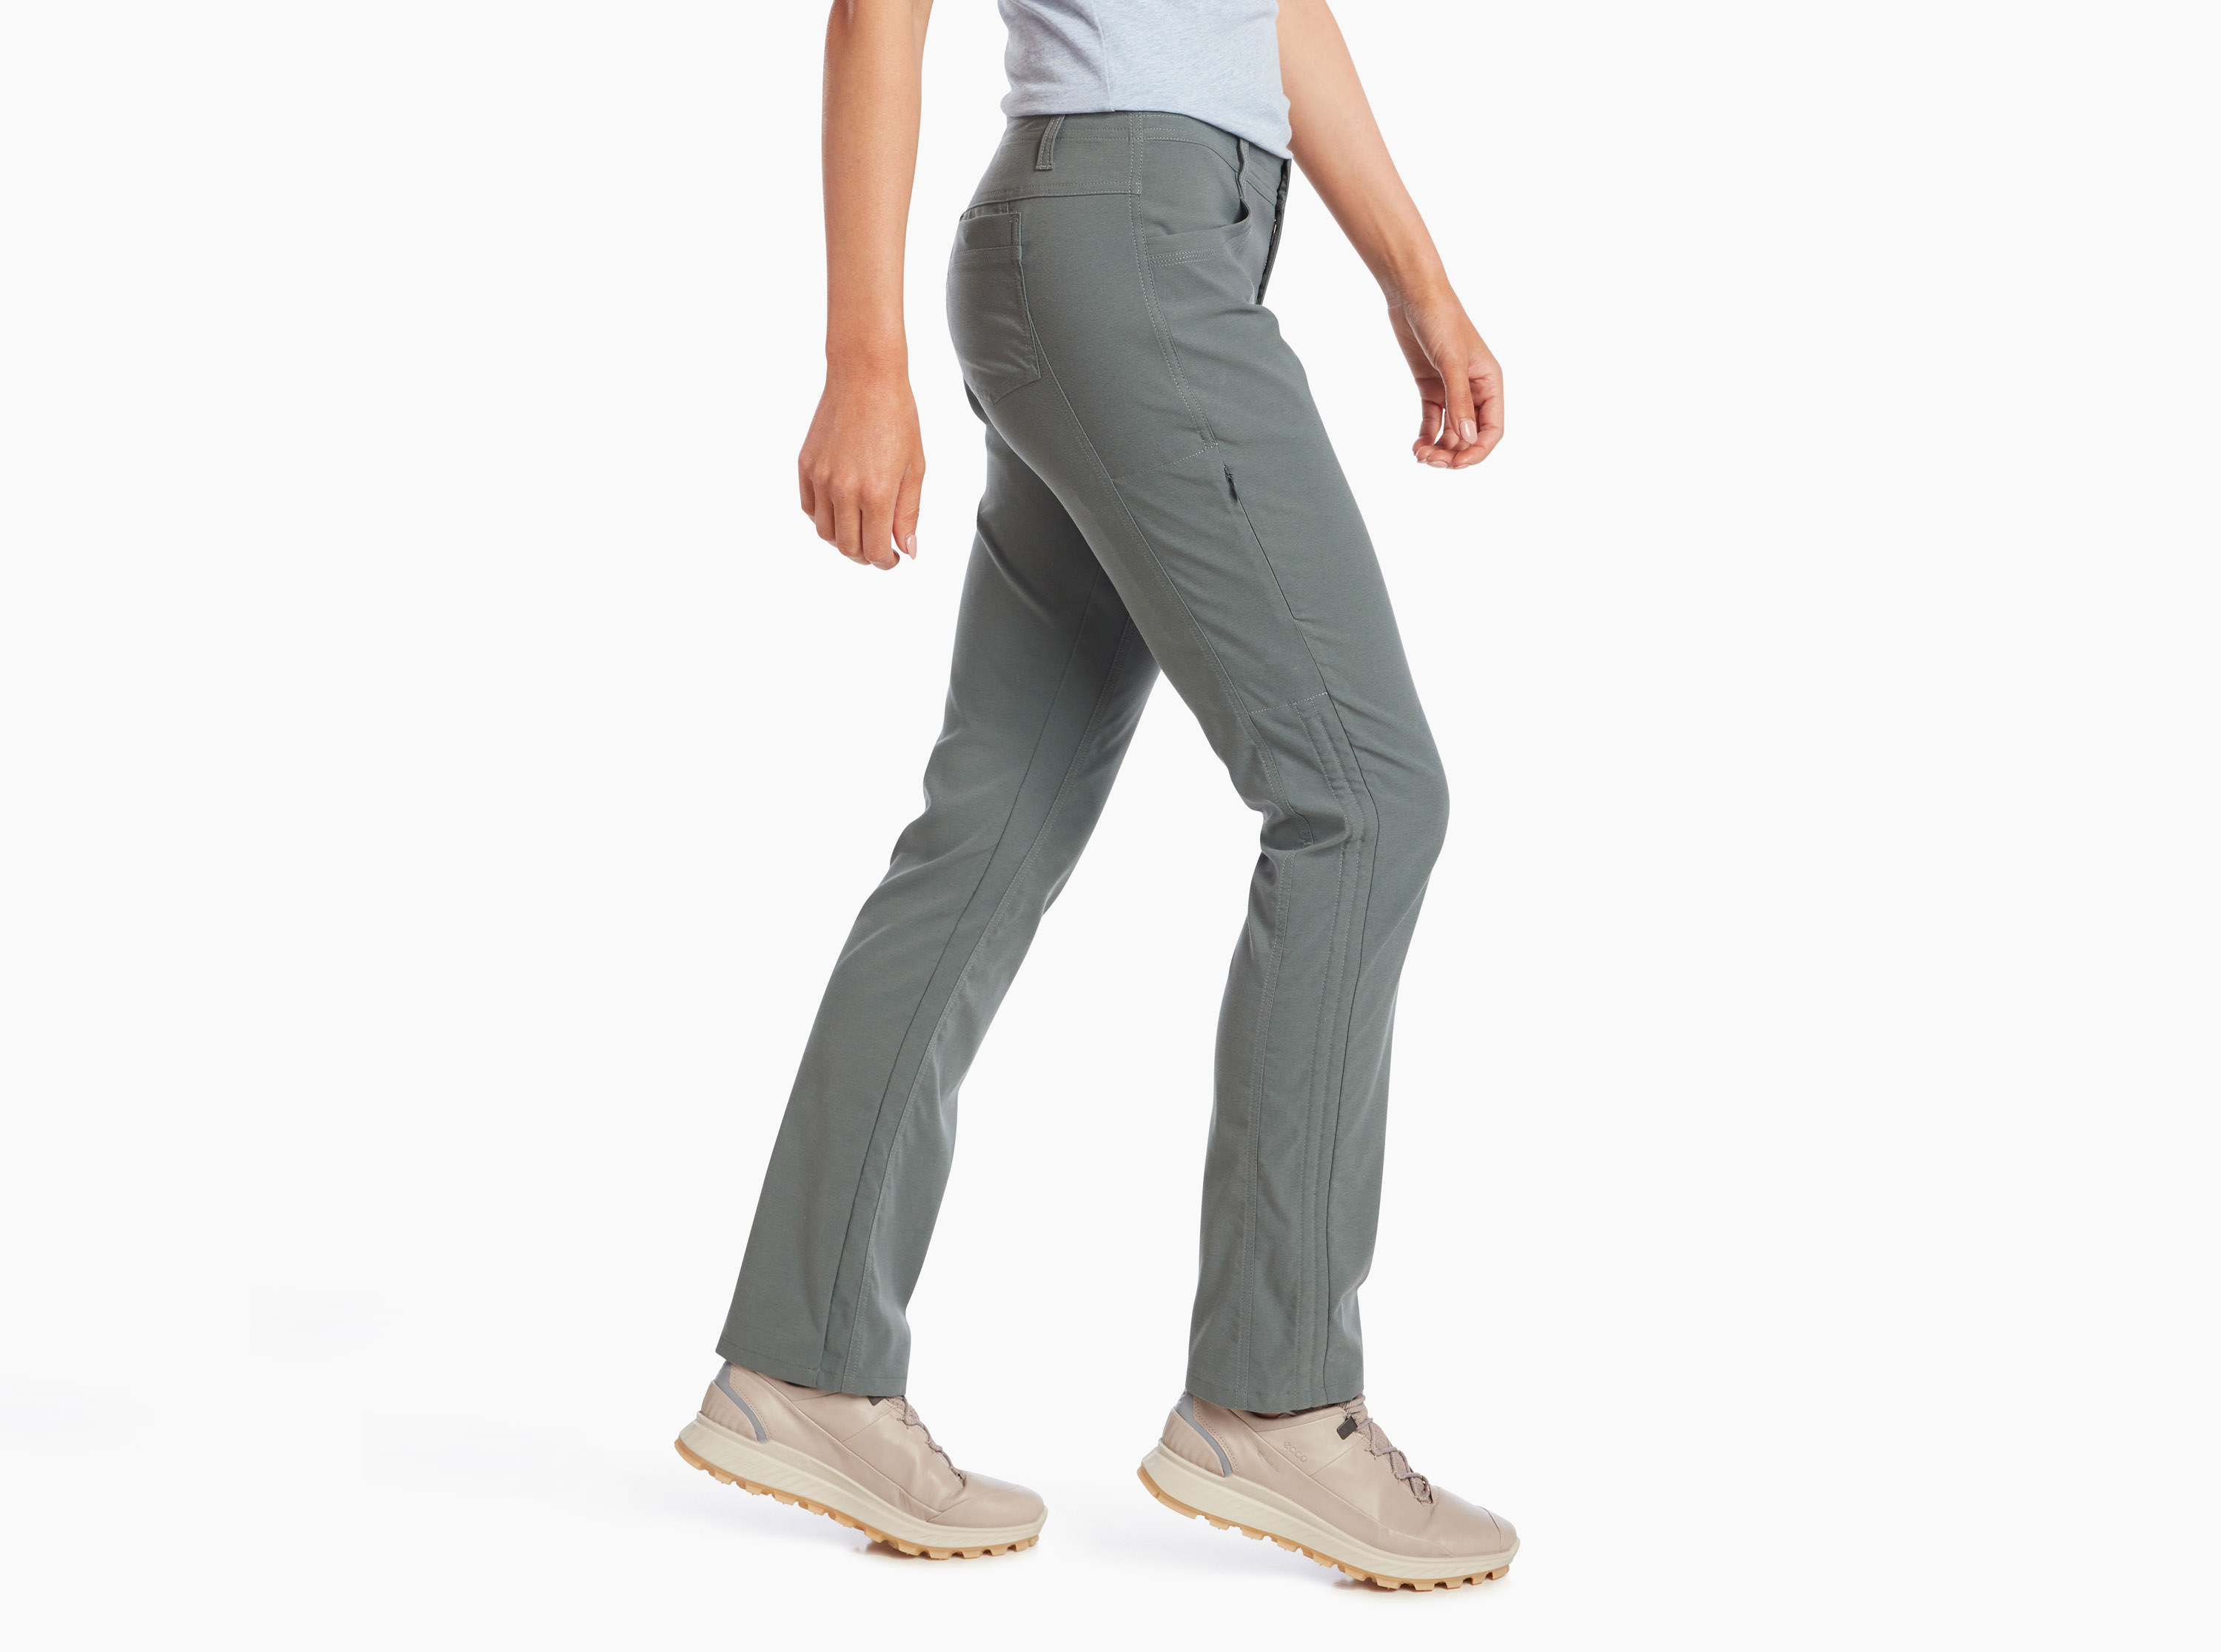 KuhlRydr Pants, 34 Inseam - Womens